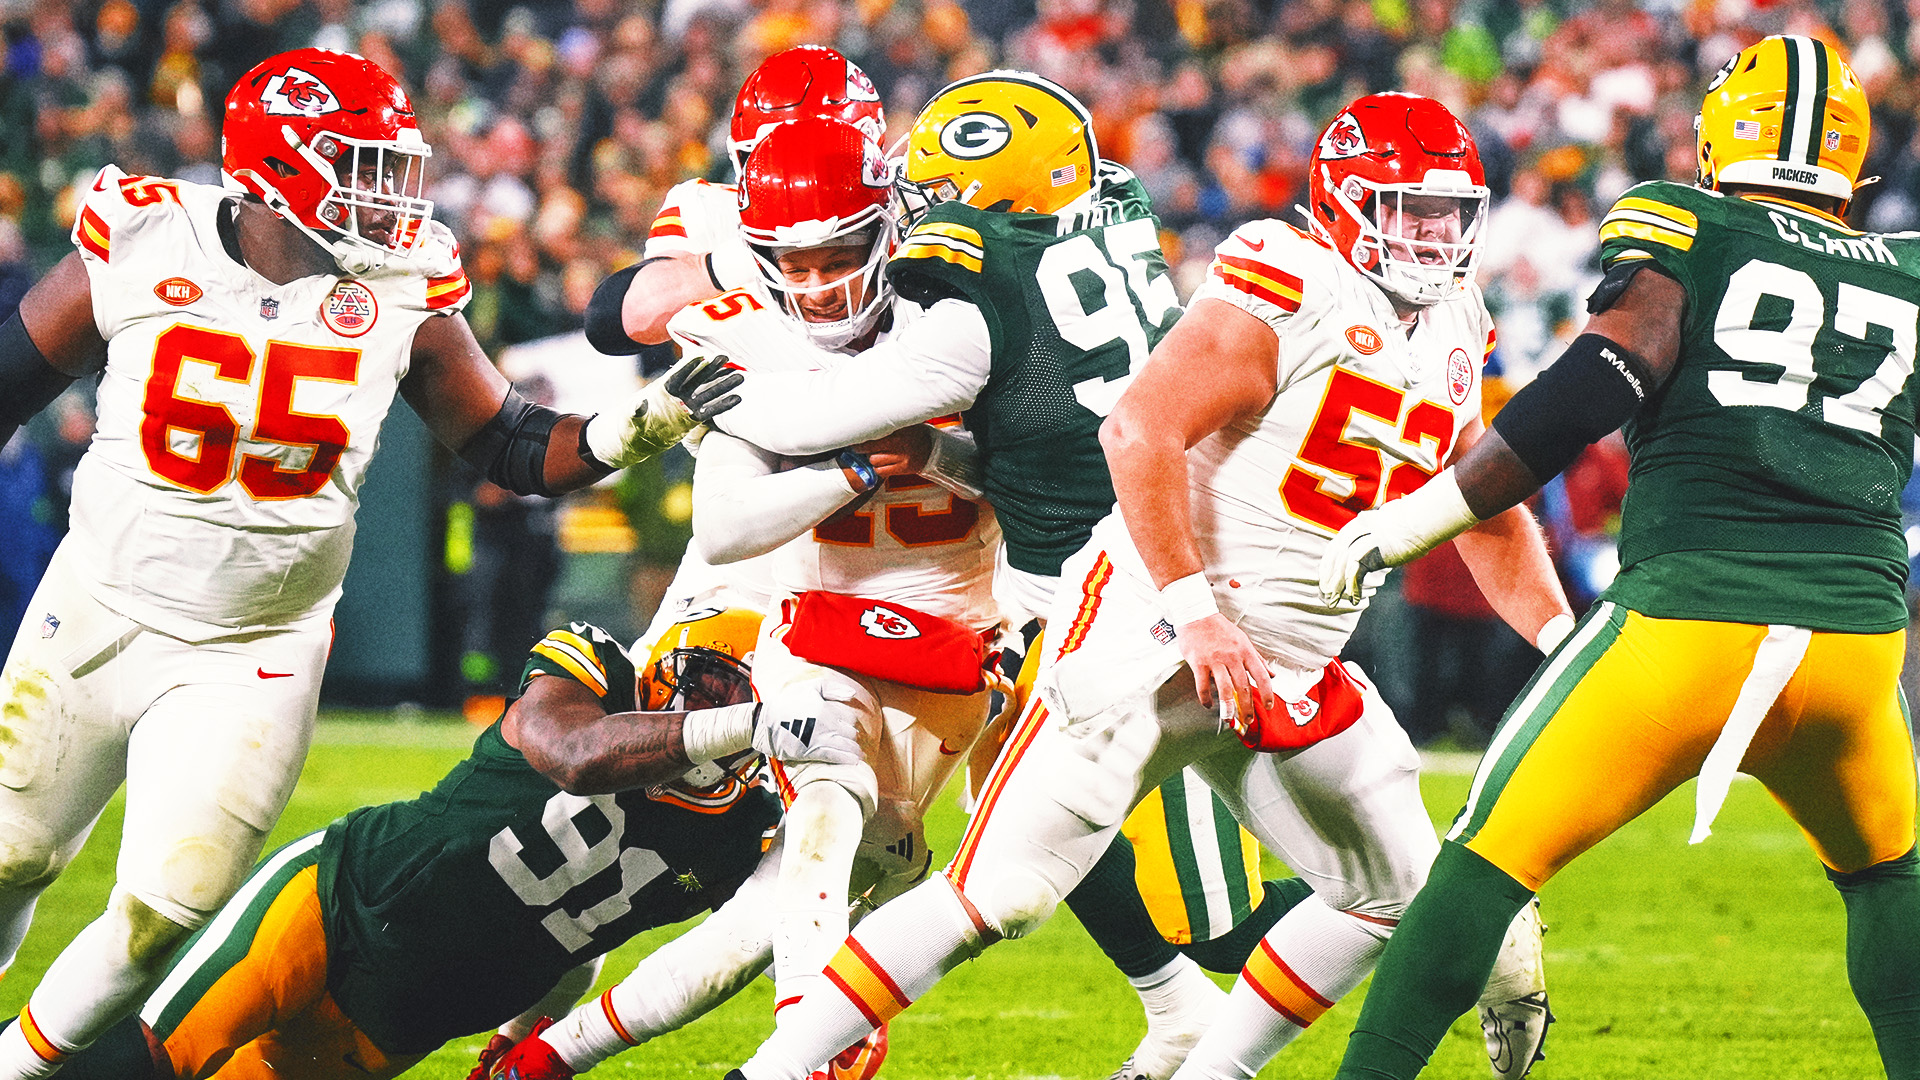 Chiefs rue penalties, miscues and questionable officiating in loss to Packers